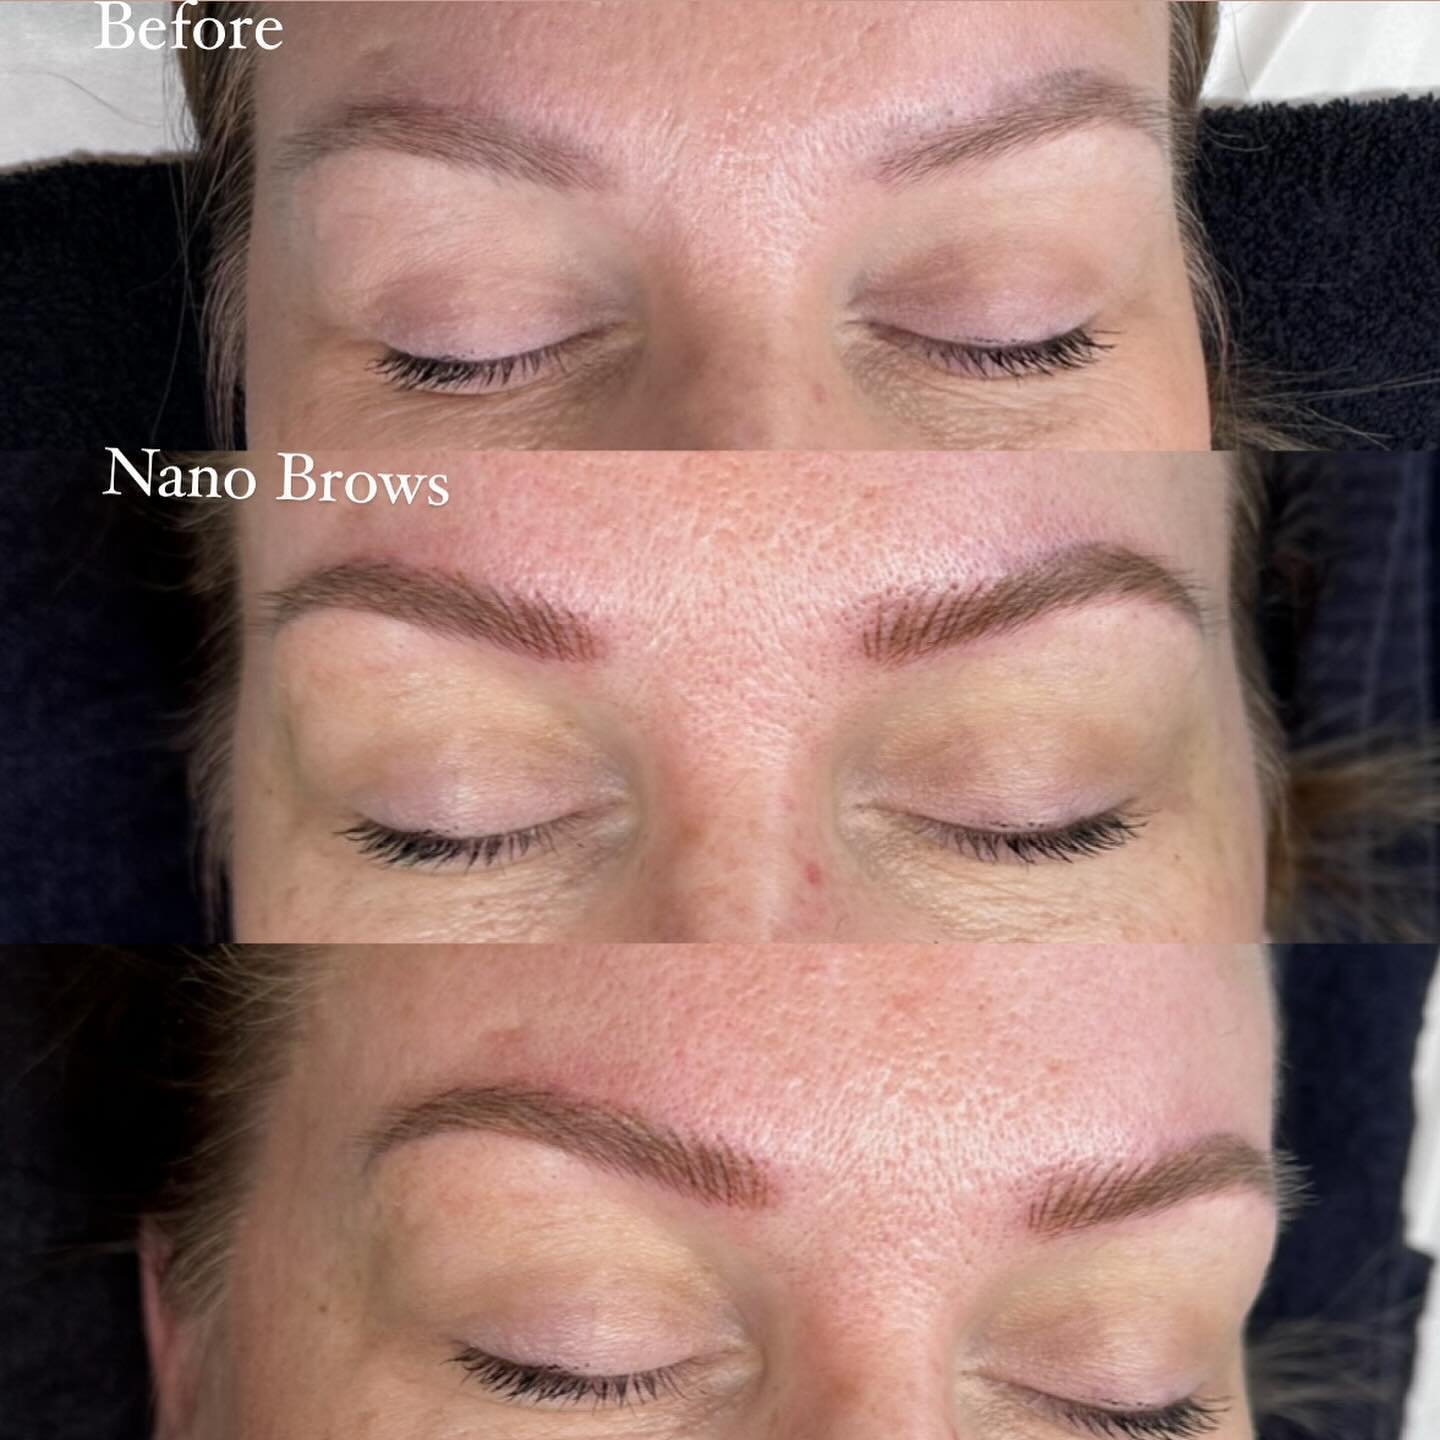 My beautiful client came in a bit skeptical with an old faded work; she was concerned of the outcome of nano over her previous work! 

She left extremely happy with her new #nanopowdercombobrows 💫🪄